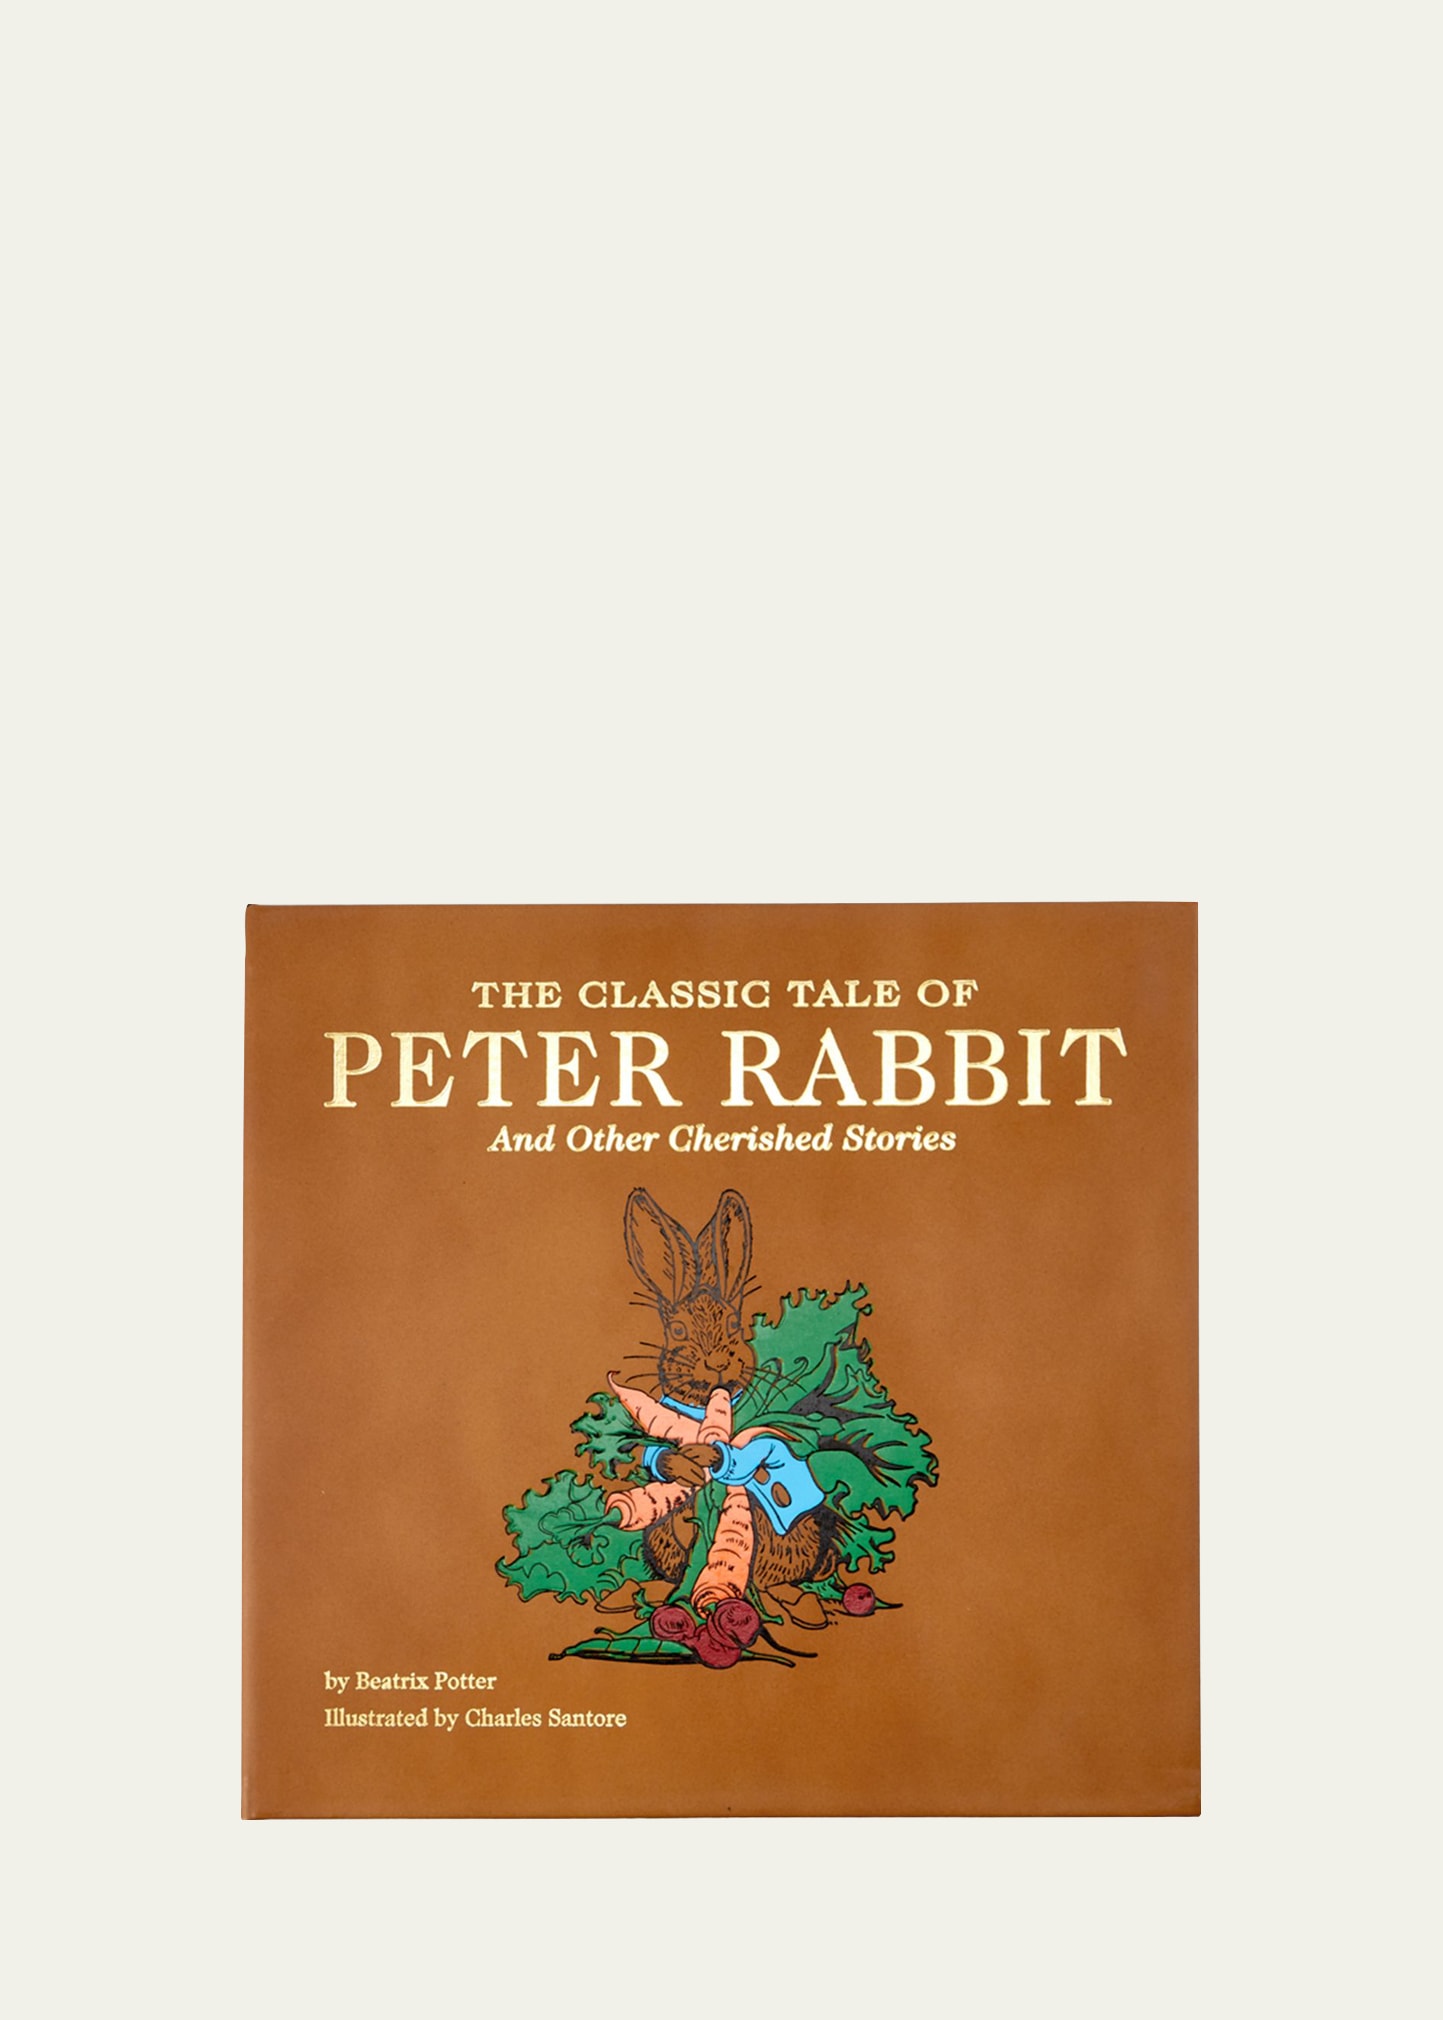 The Classic Tale of Peter Rabbit Book in Genuine Leather